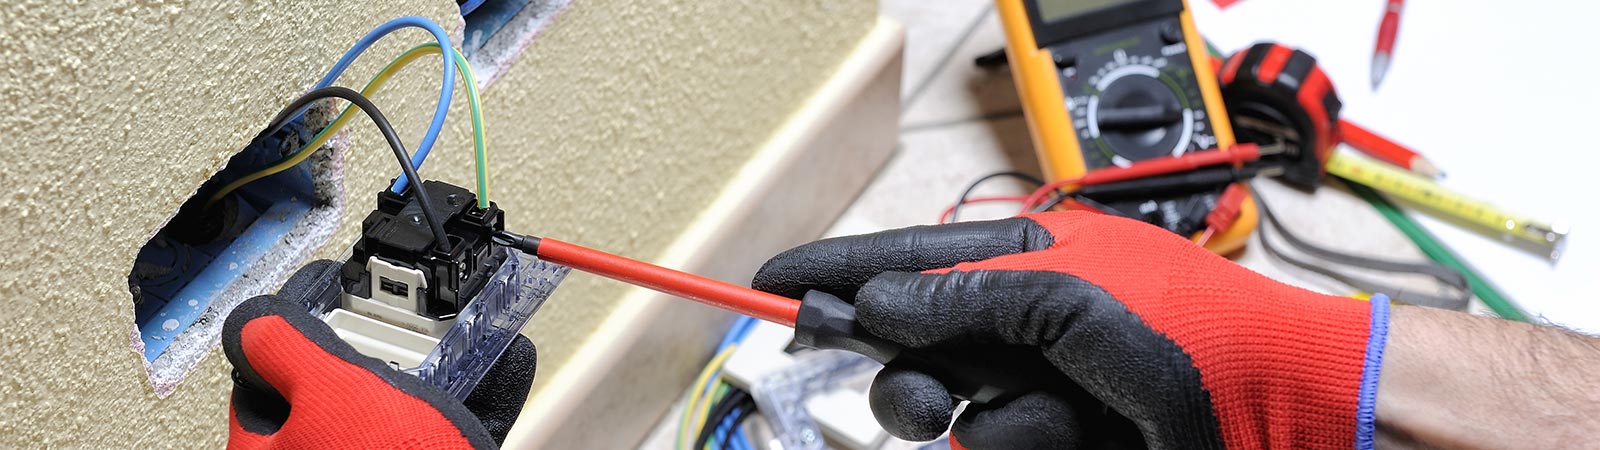 how to diagnose electrical problems at home